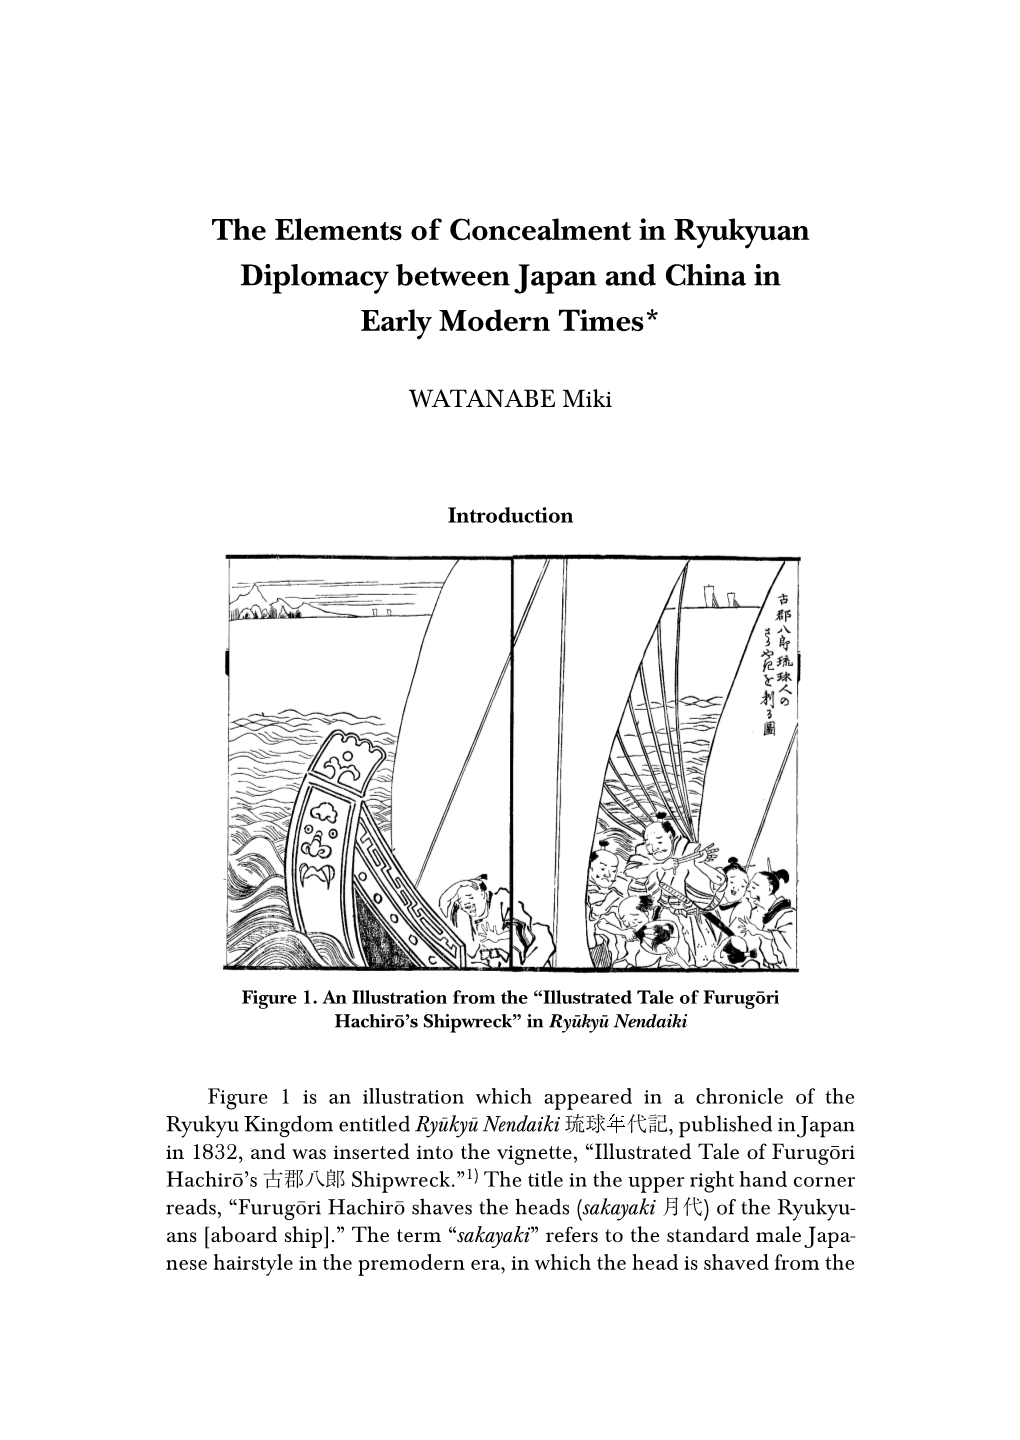 The Elements of Concealment in Ryukyuan Diplomacy Between Japan and China in Early Modern Times*